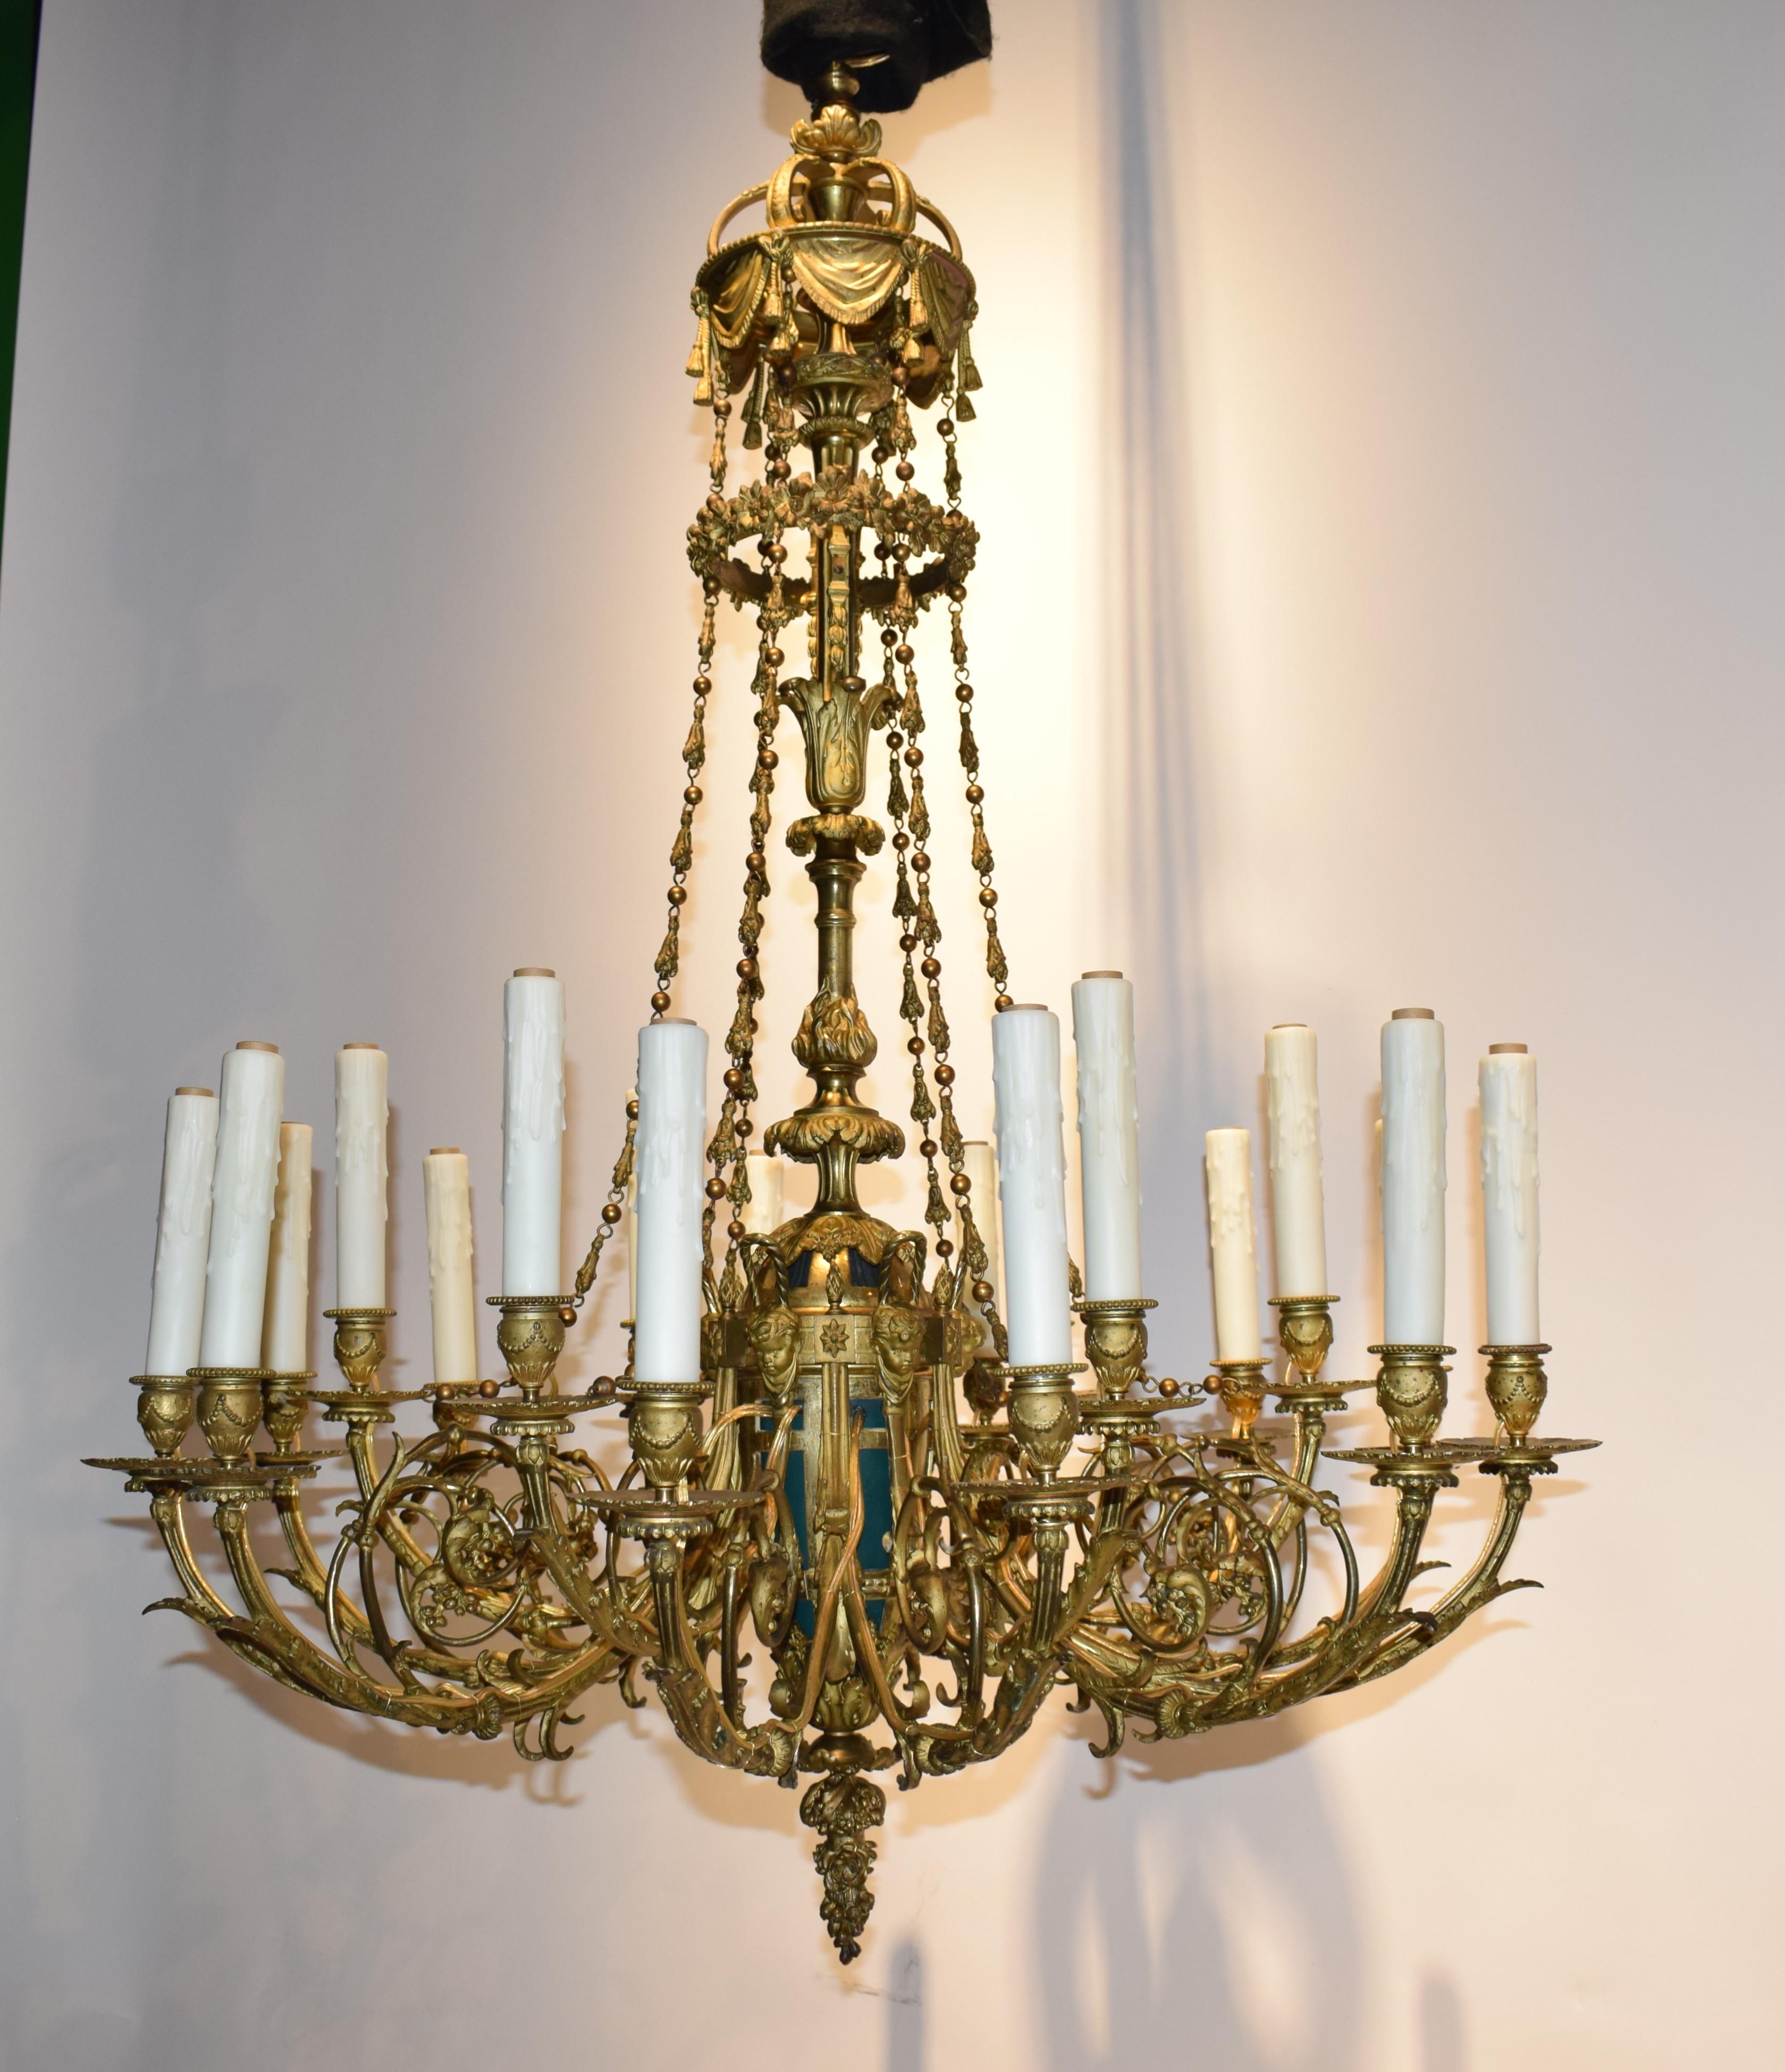 Extraordinary Gilt Bronze Chandelier originally for candles (now electrified)
France, circa 1880. 18 Lights. 
Dimensions: Height 46